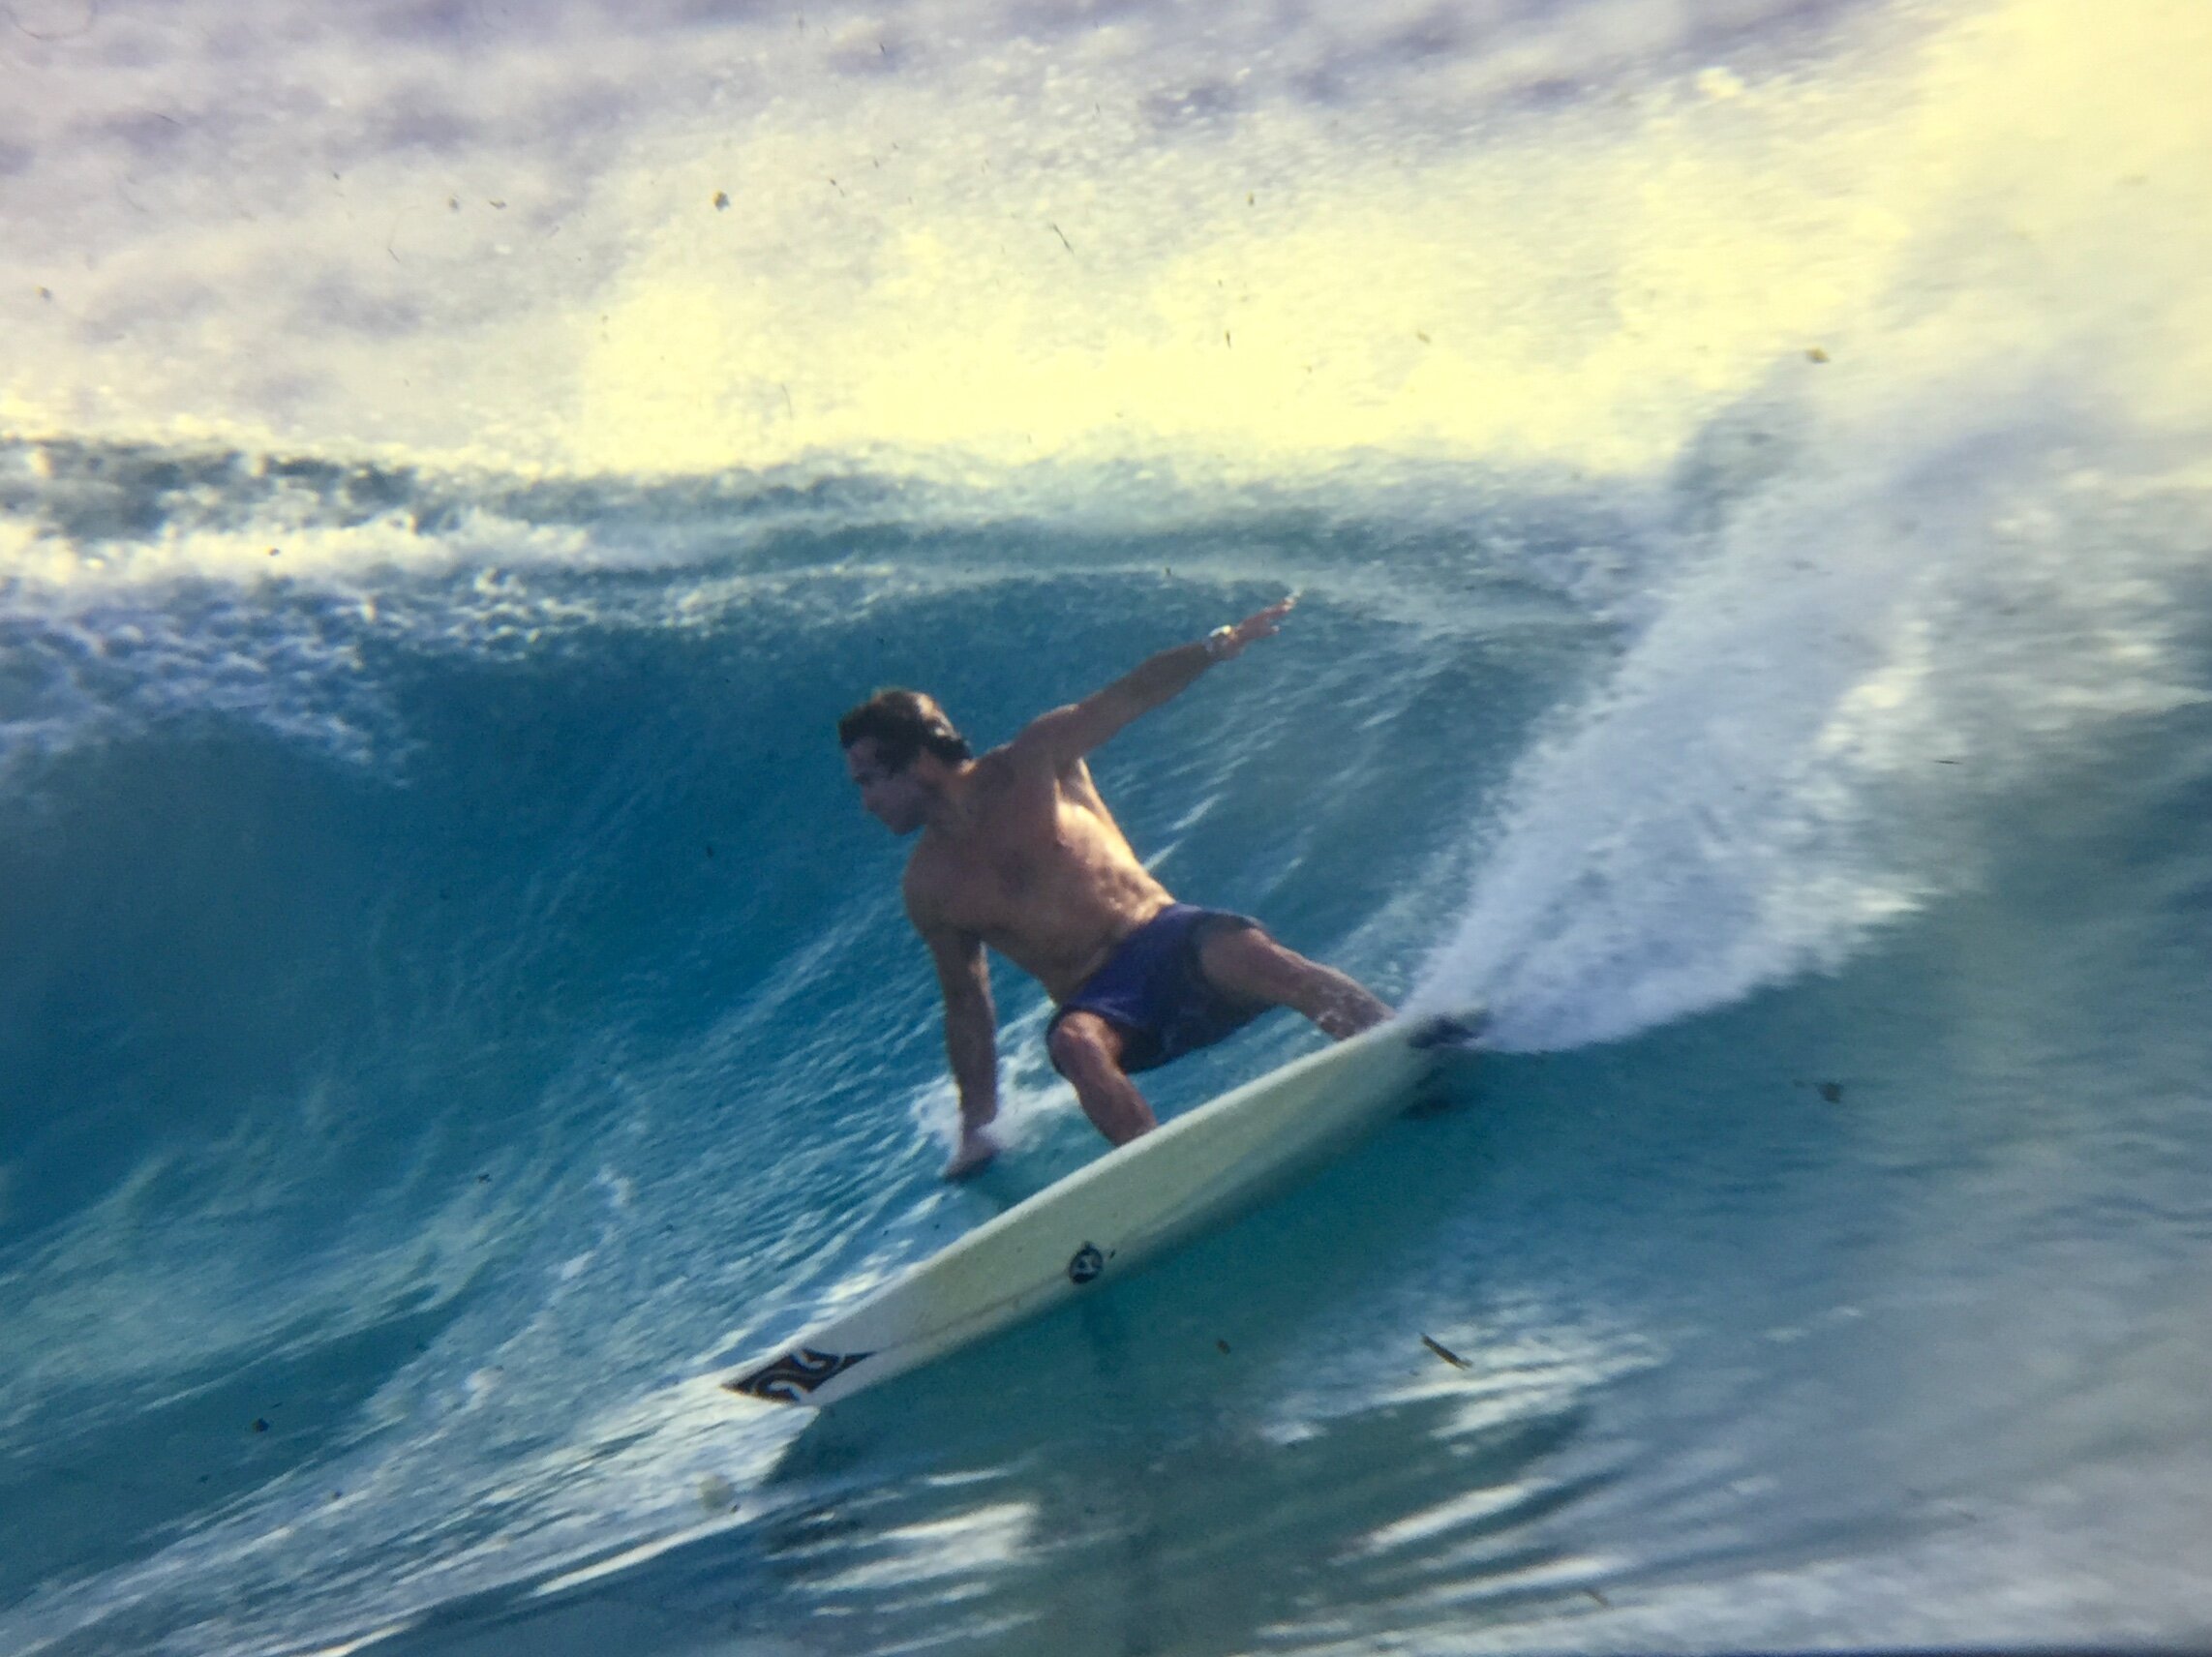  North Stradbroke Island legend Russell Specht laying it on a rail with perfect style  